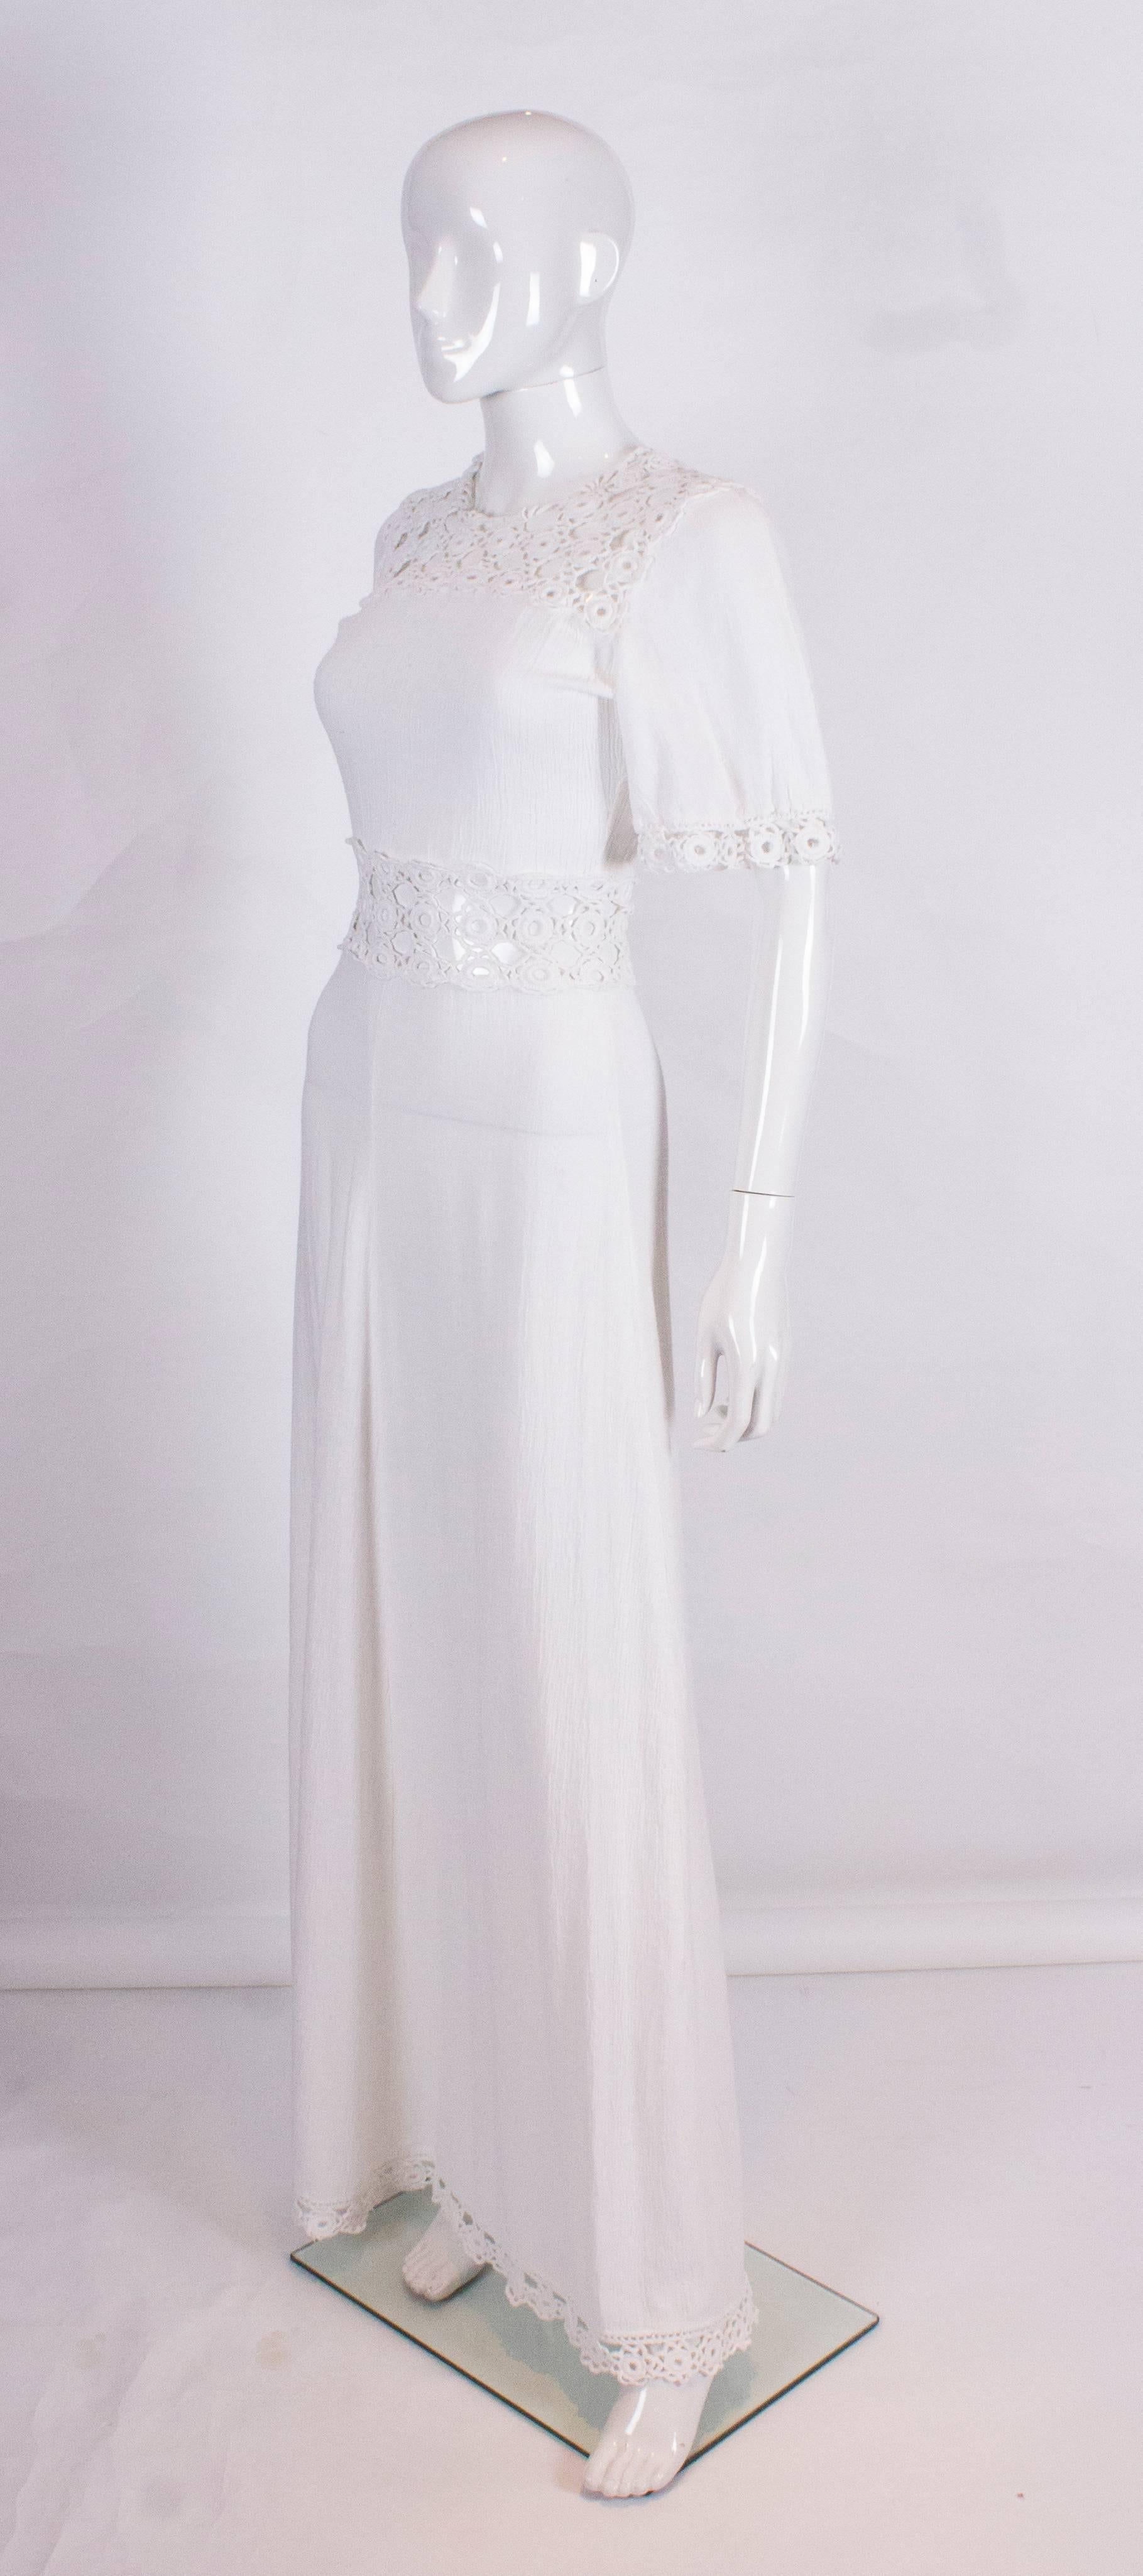 A chic cheesecloth dress with crochet detail. The dress has crochet detail on the yoke, waist, hem and edge of sleeves.